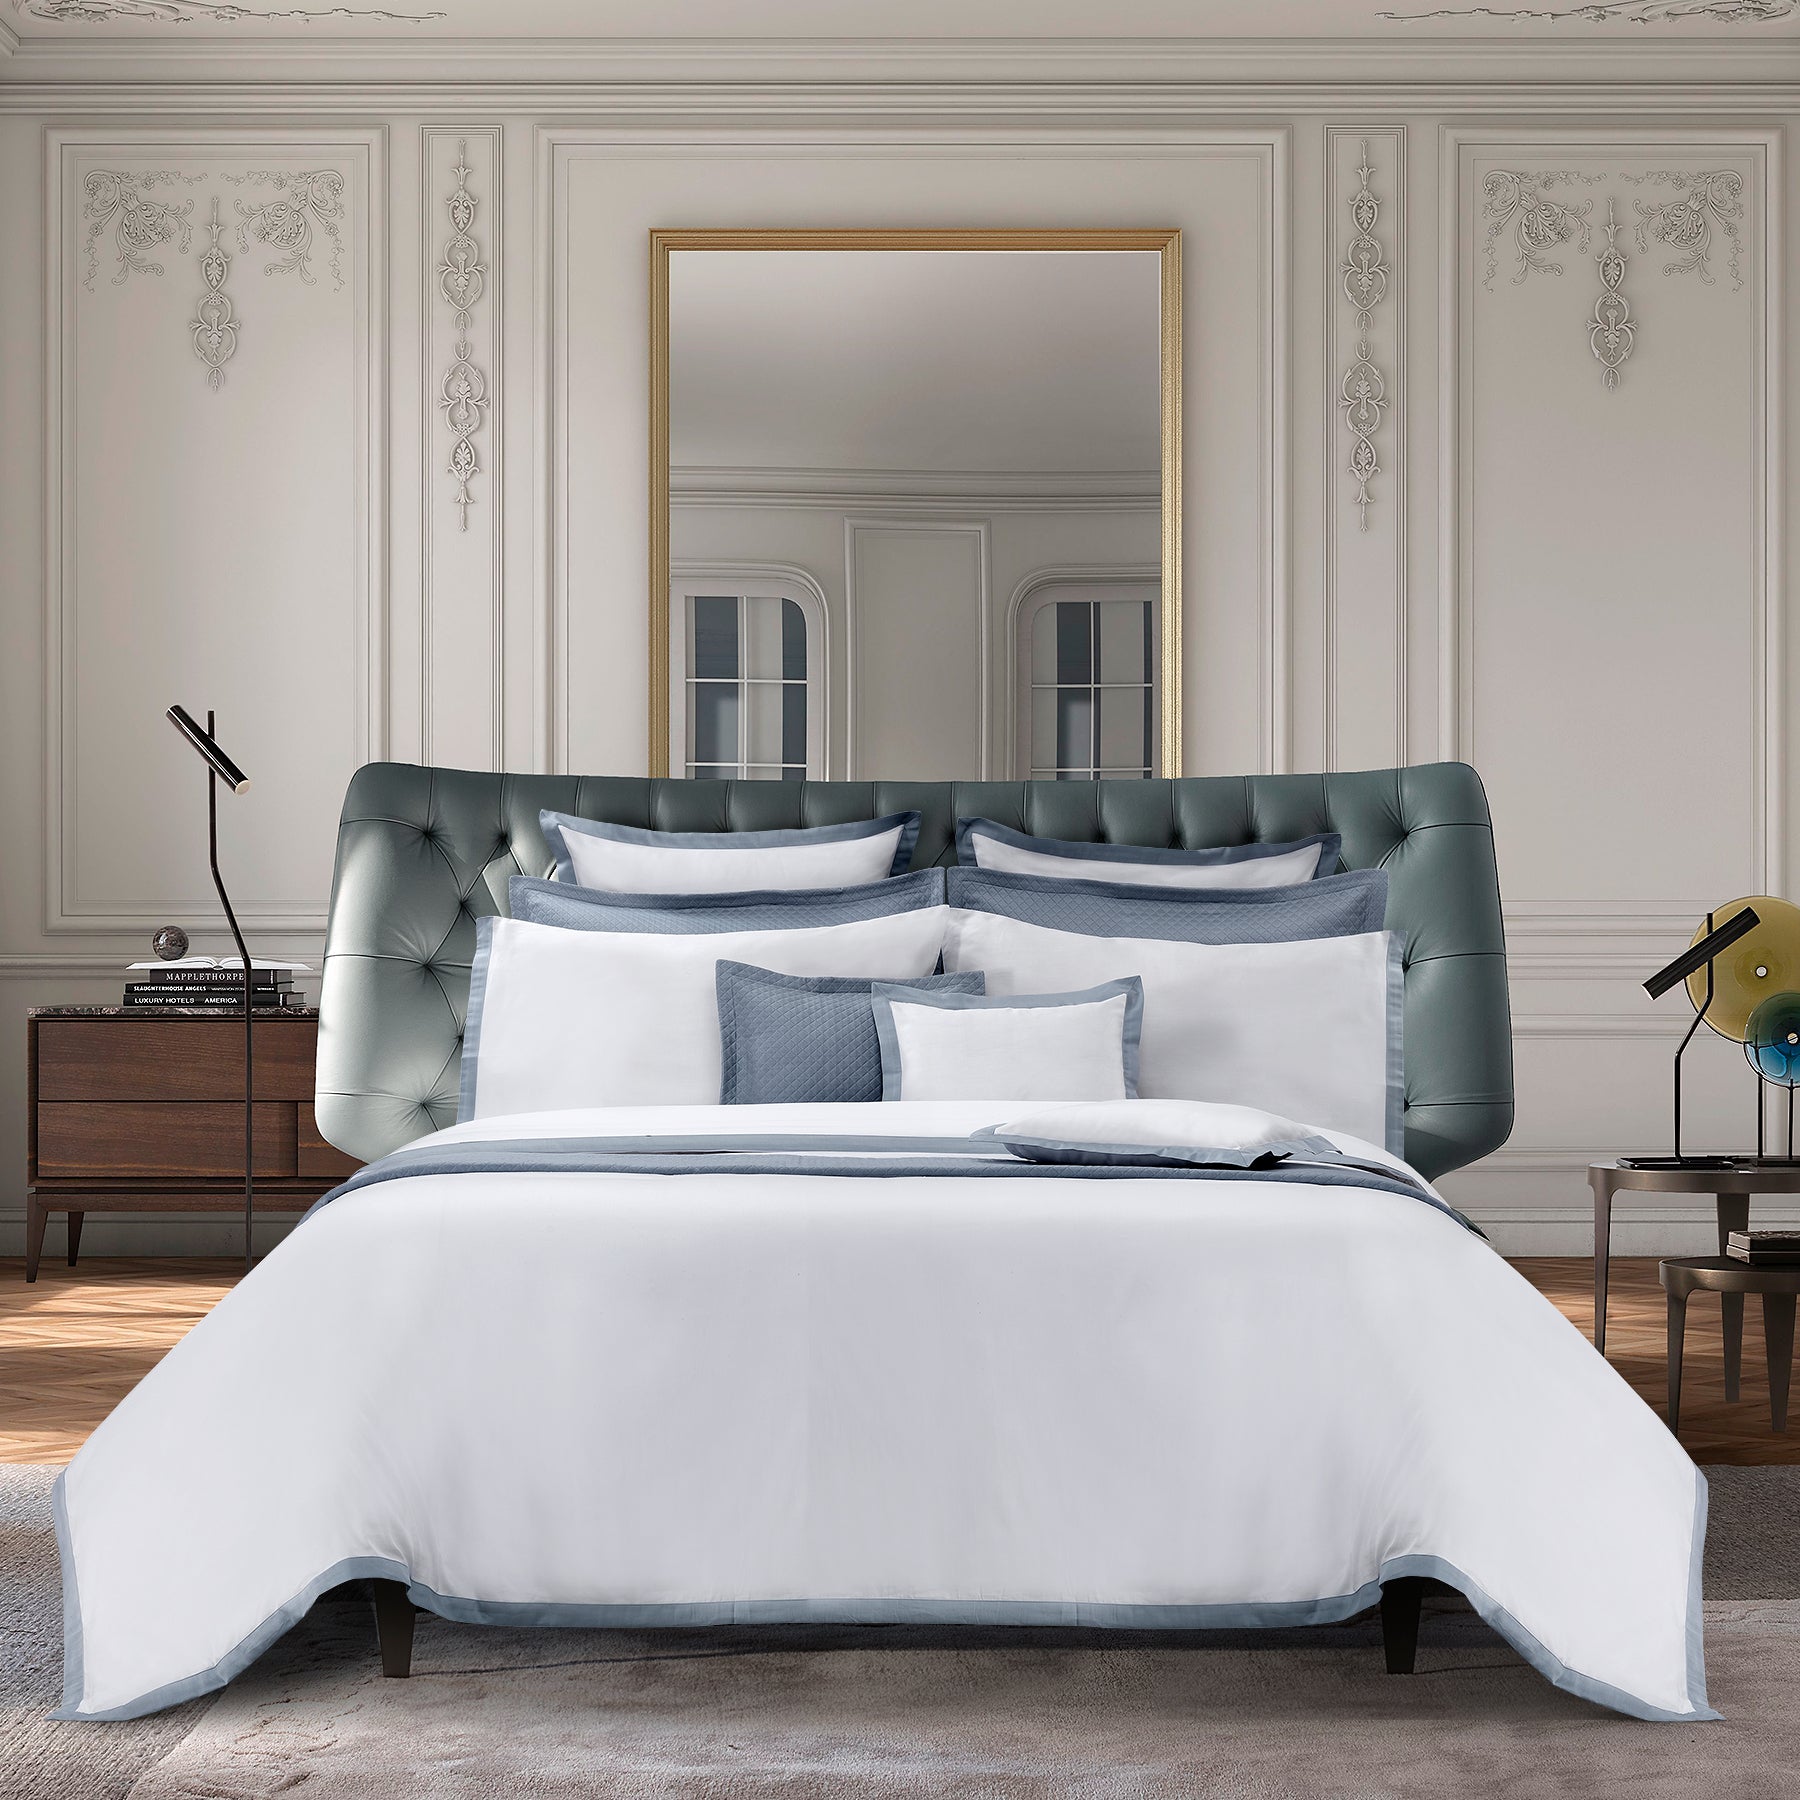 Pillowcases and Sheets - Luxury Made in Italy – Bottega 1964